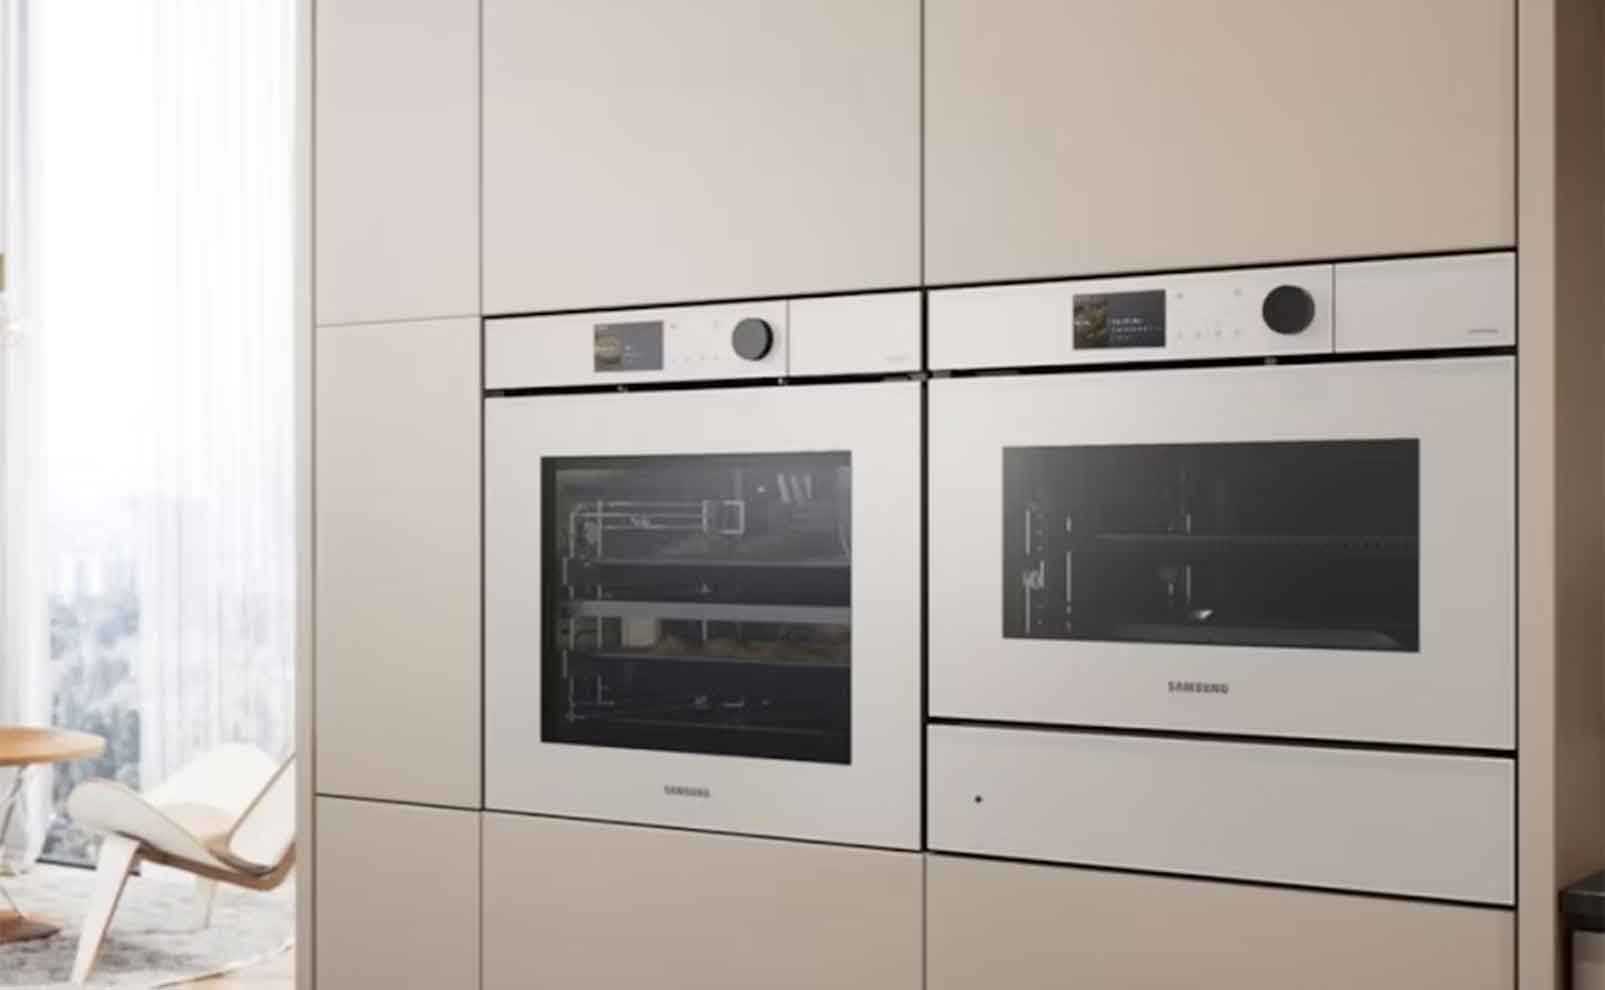 Samsung smart ovens with AI